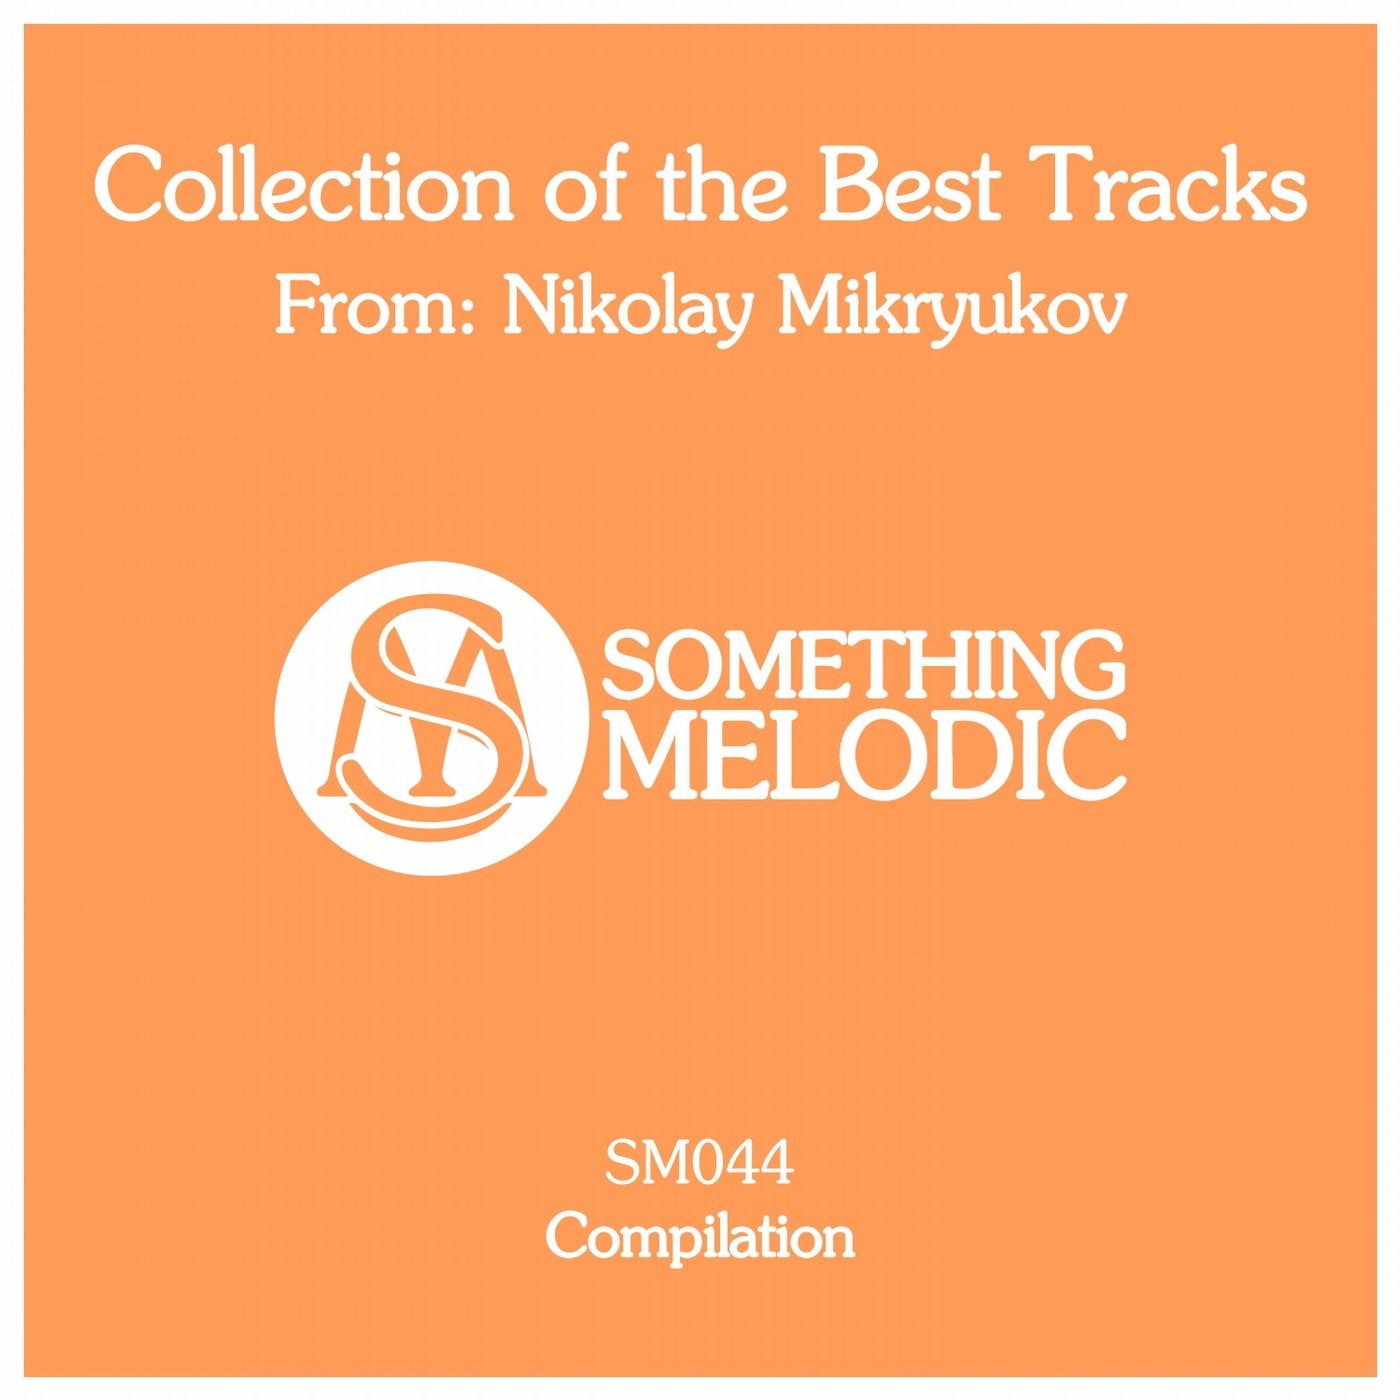 Collection of the Best Tracks From: Nikolay Mikryukov